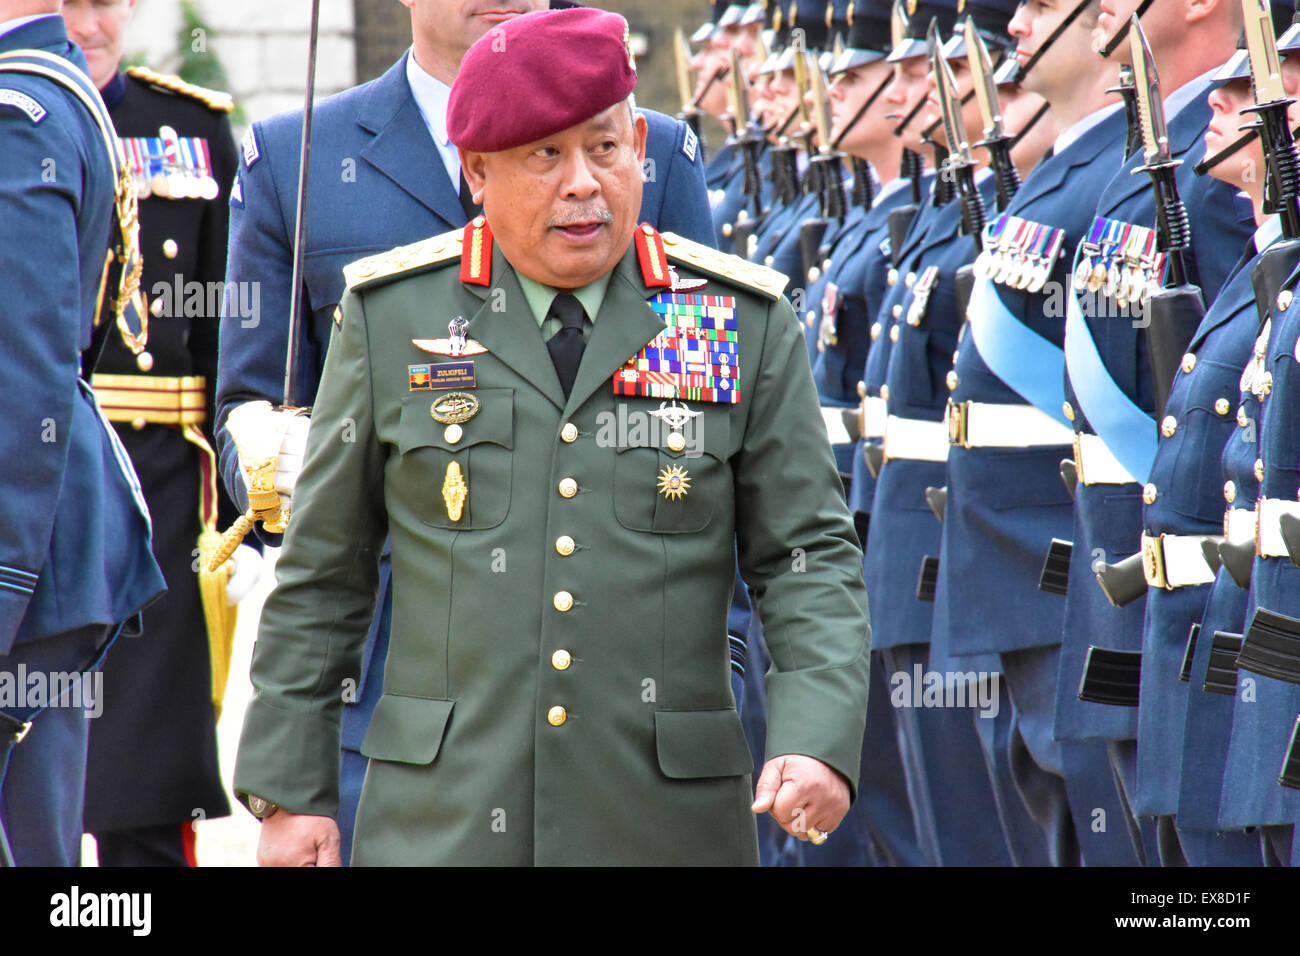 London, UK. 08th July, 2015. Malaysian Chief of Defence Forces, General Tan Sri Dato' Sri Zulkifeli Mohd Zin inspect The Guard of Honour found by The Queen's Colour Squadron, Royal Air Force, with musical support from The Band of the Royal Air Force at the Horse Guards Parade, London, July 08, 2015. Credit:  Rosli Othman/Alamy Live News Stock Photo